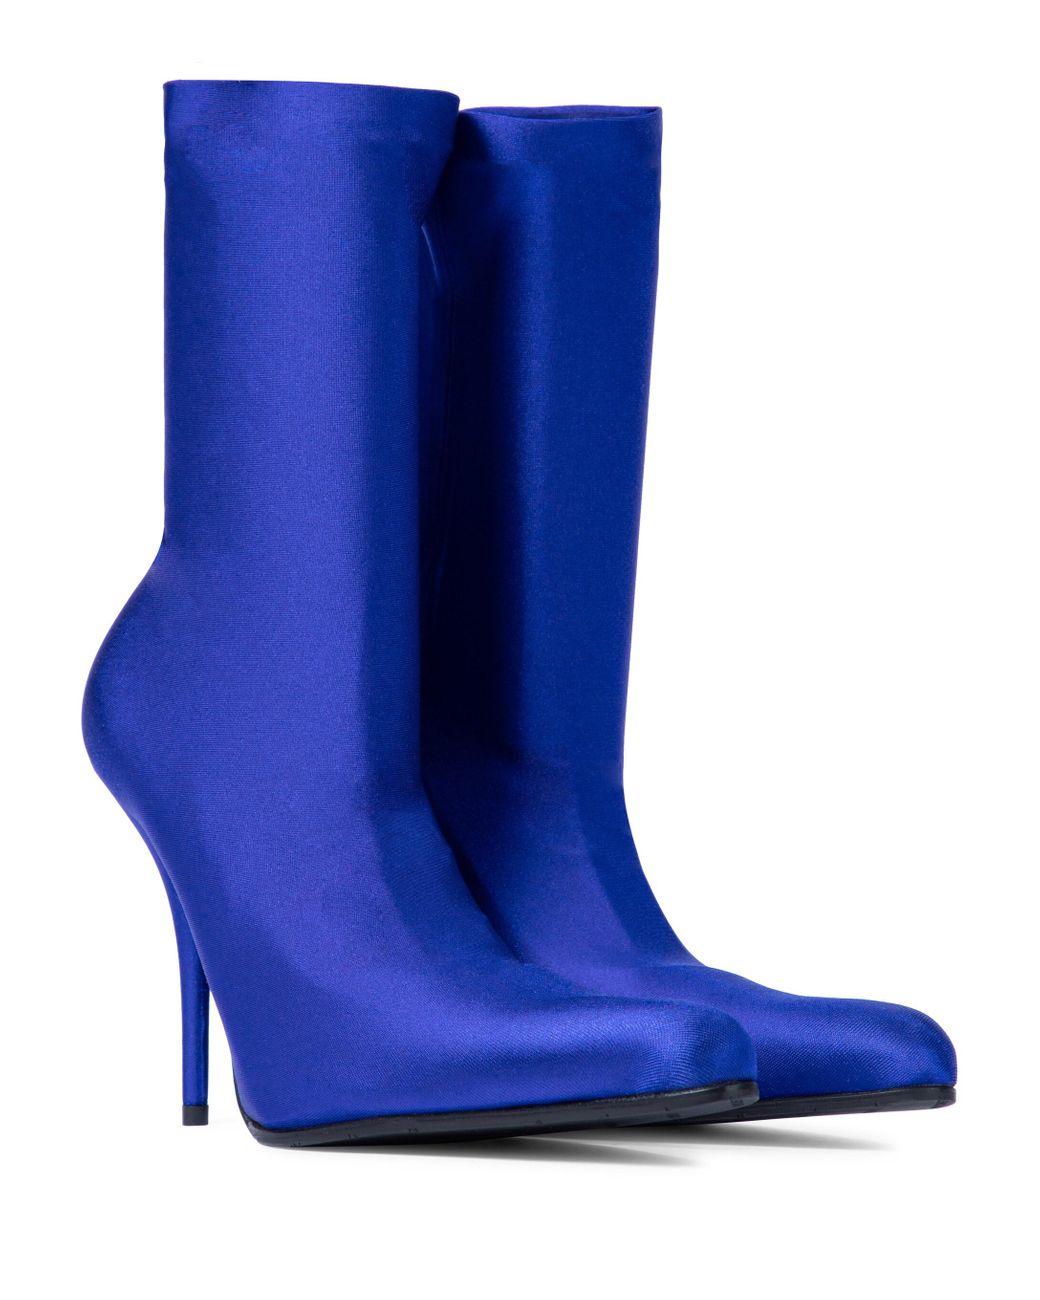 Mor motto Hemmelighed Balenciaga Knife Sock Boots in Blue | Lyst